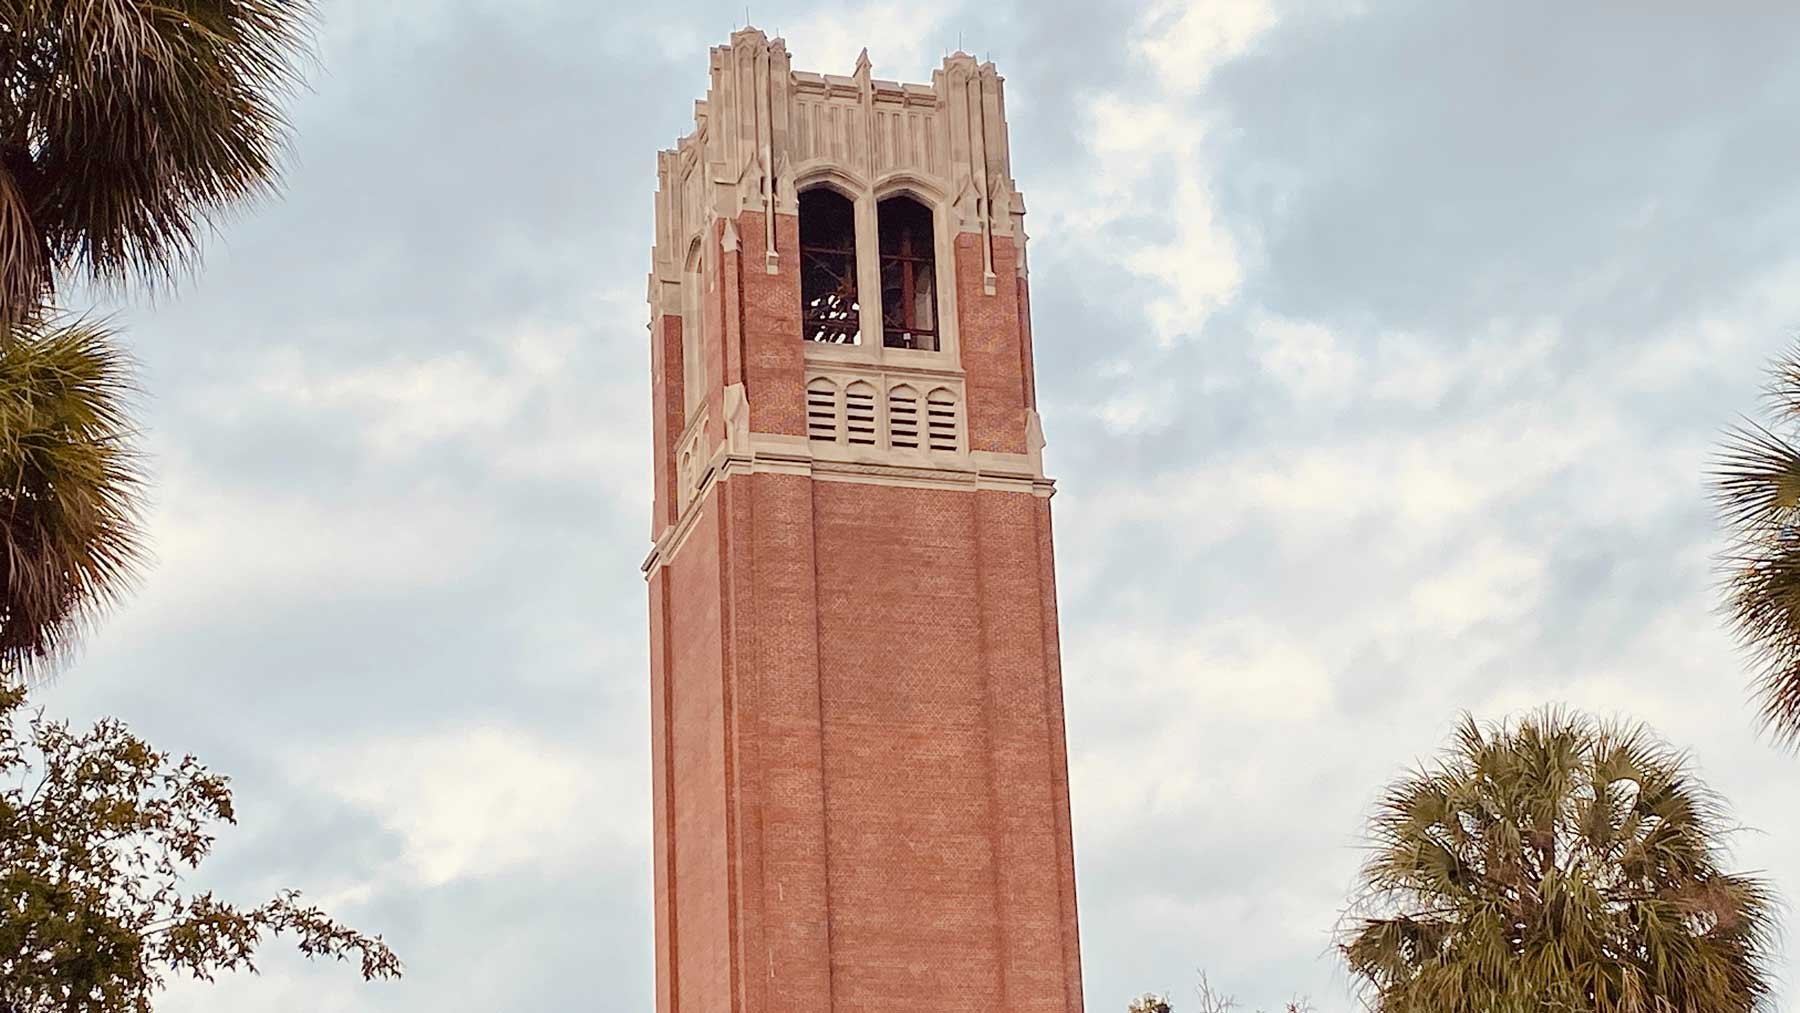 Century Tower at the University of Florida